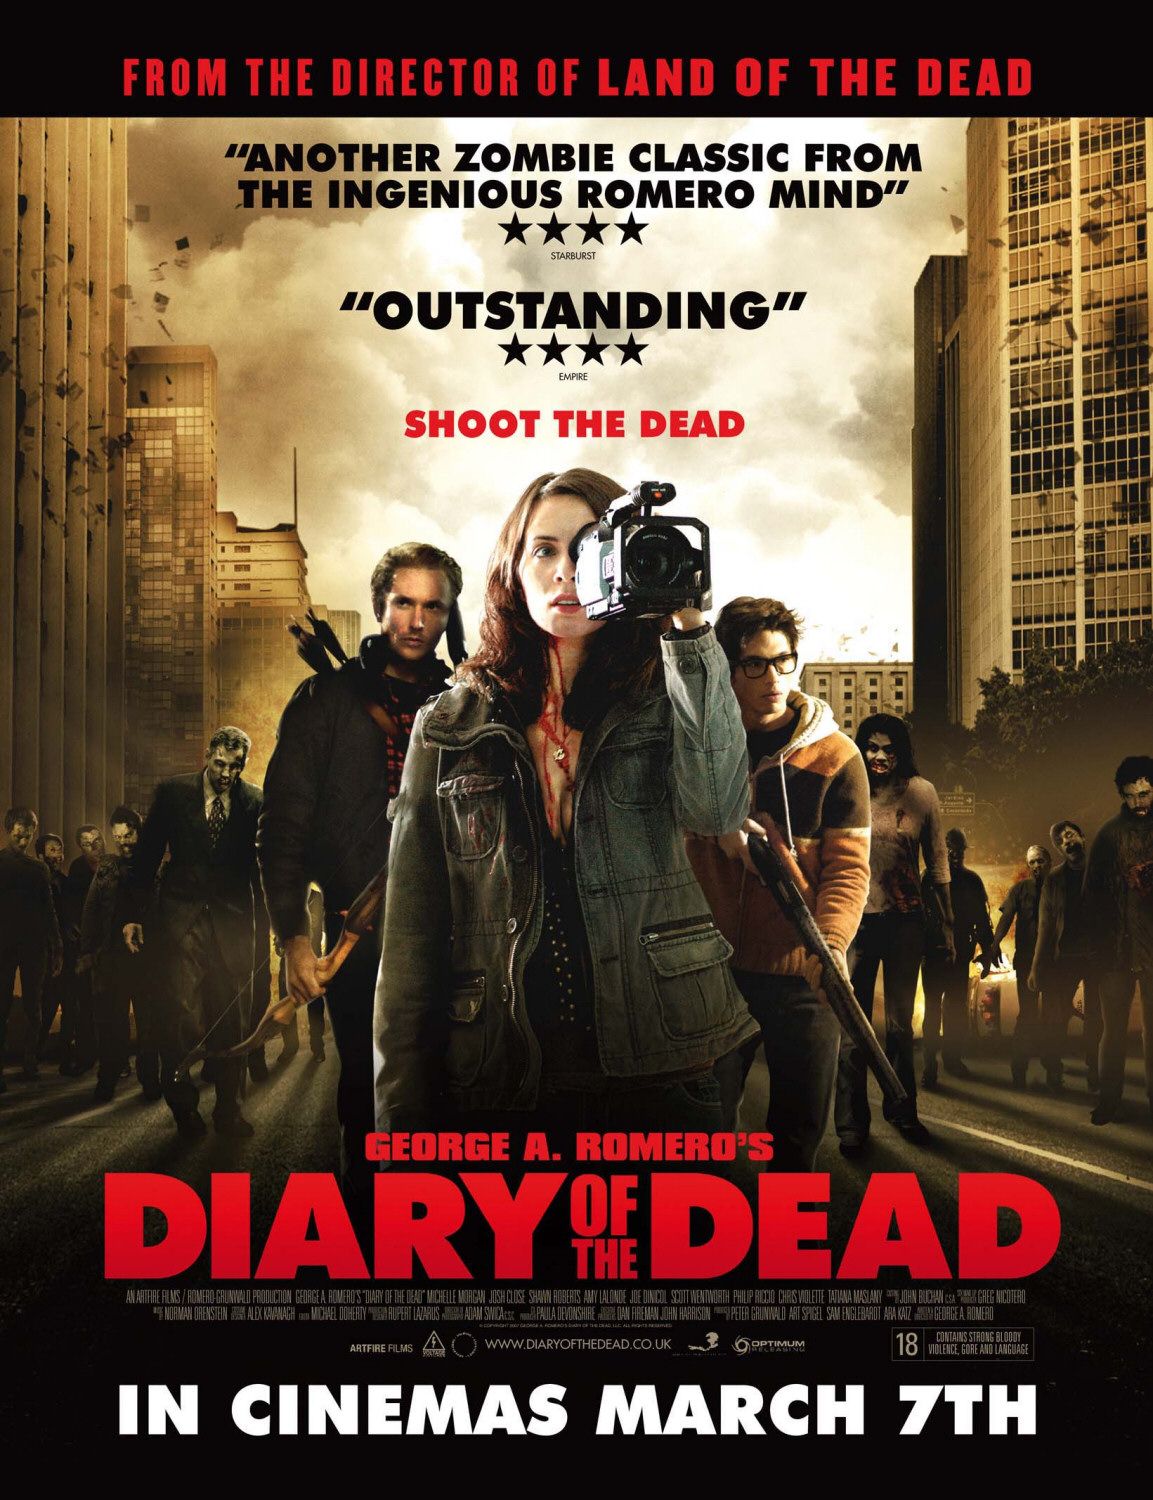 Diary Of The Dead #2